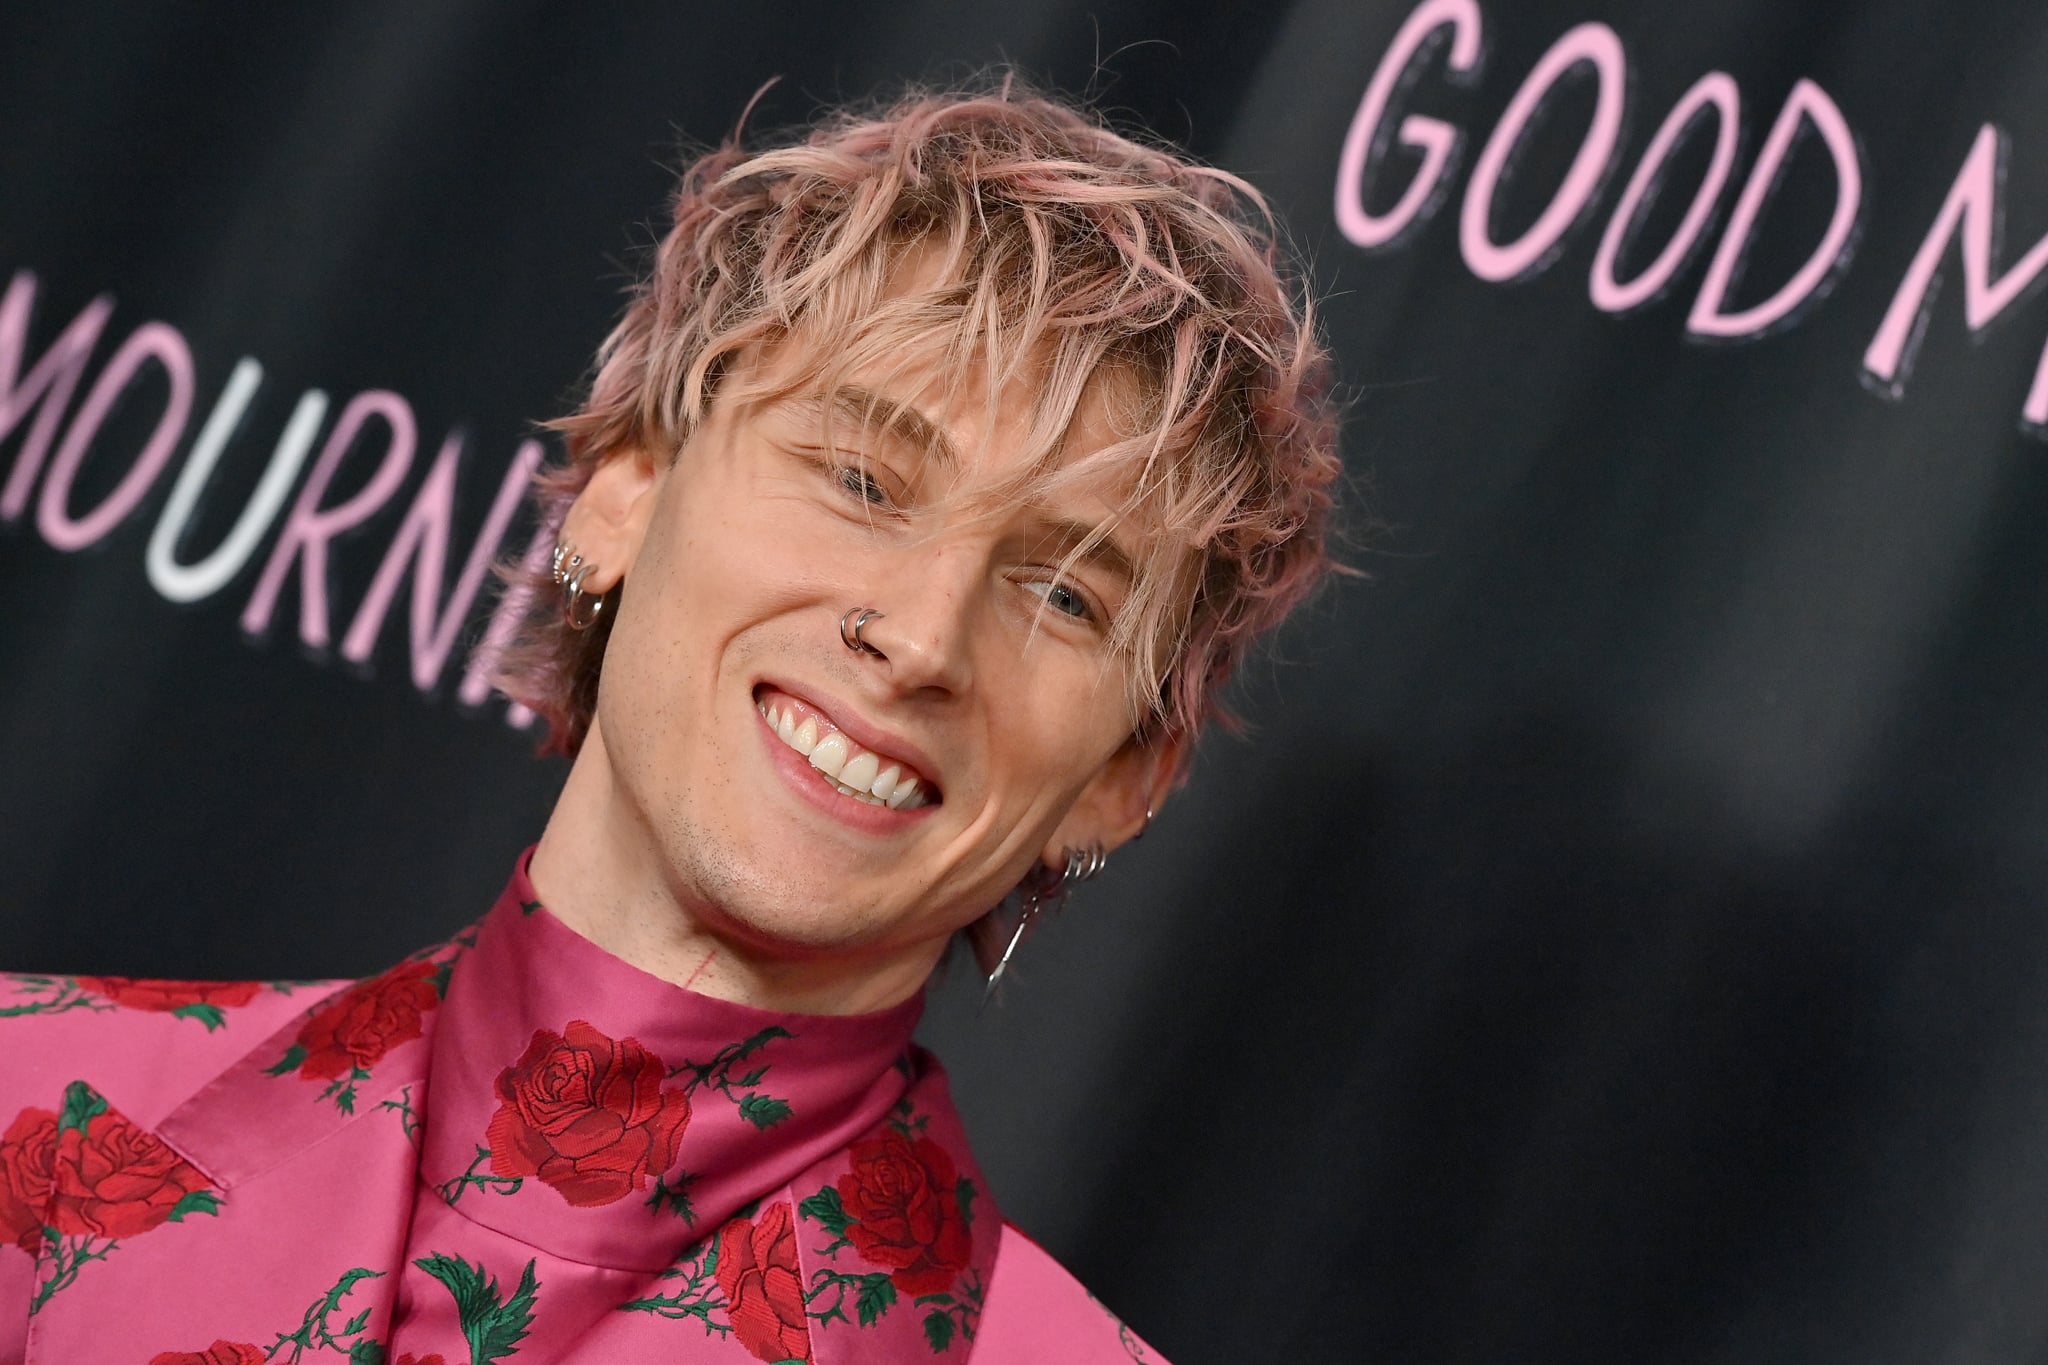 WEST HOLLYWOOD, CALIFORNIA - MAY 12: Machine Gun Kelly attends the World Premiere of 